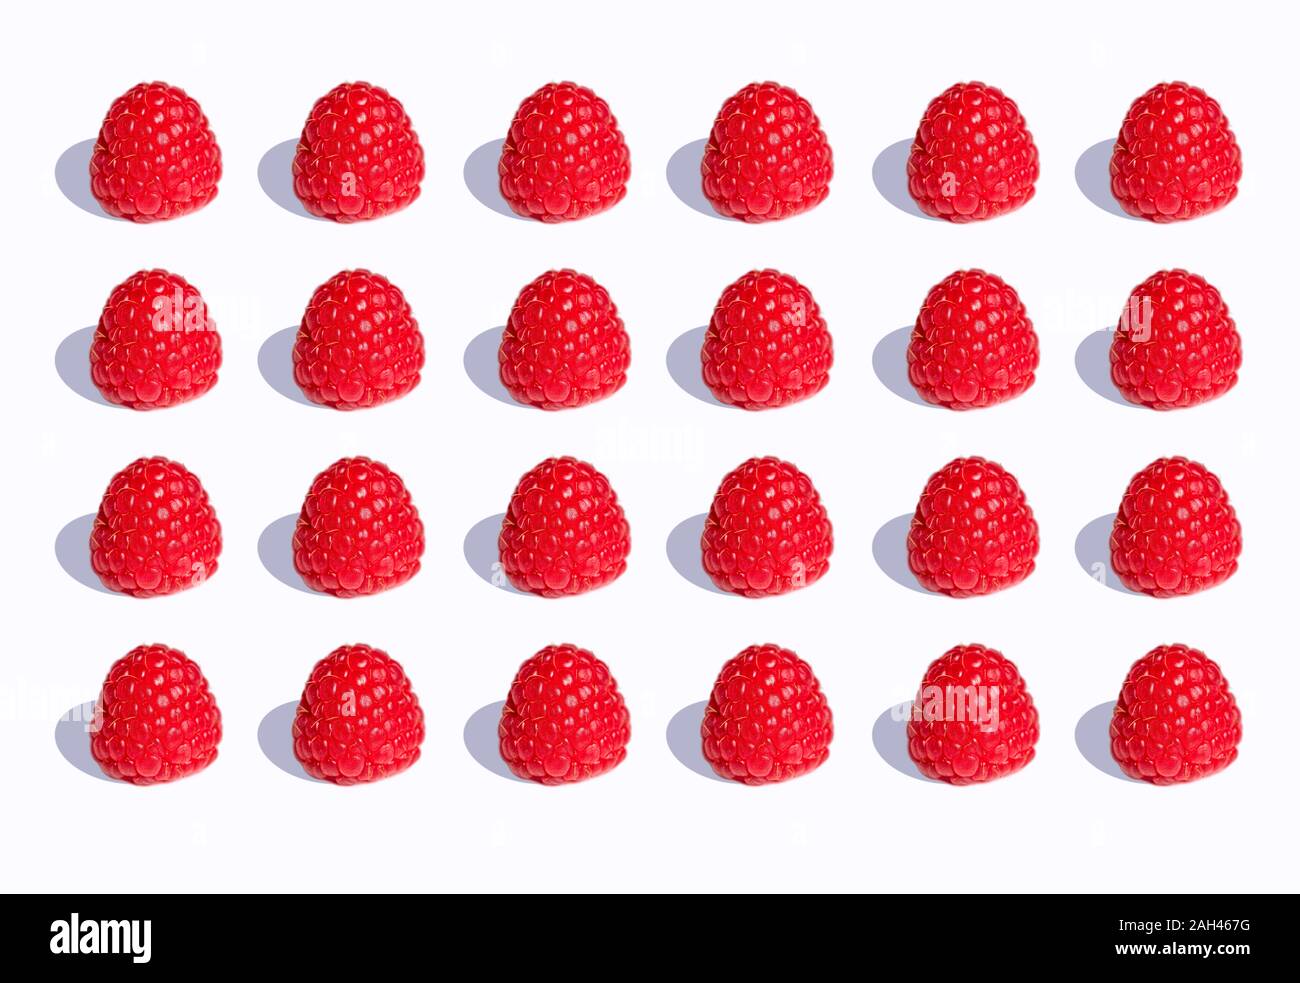 3D Illustration, raspberries in a row on white background Stock Photo